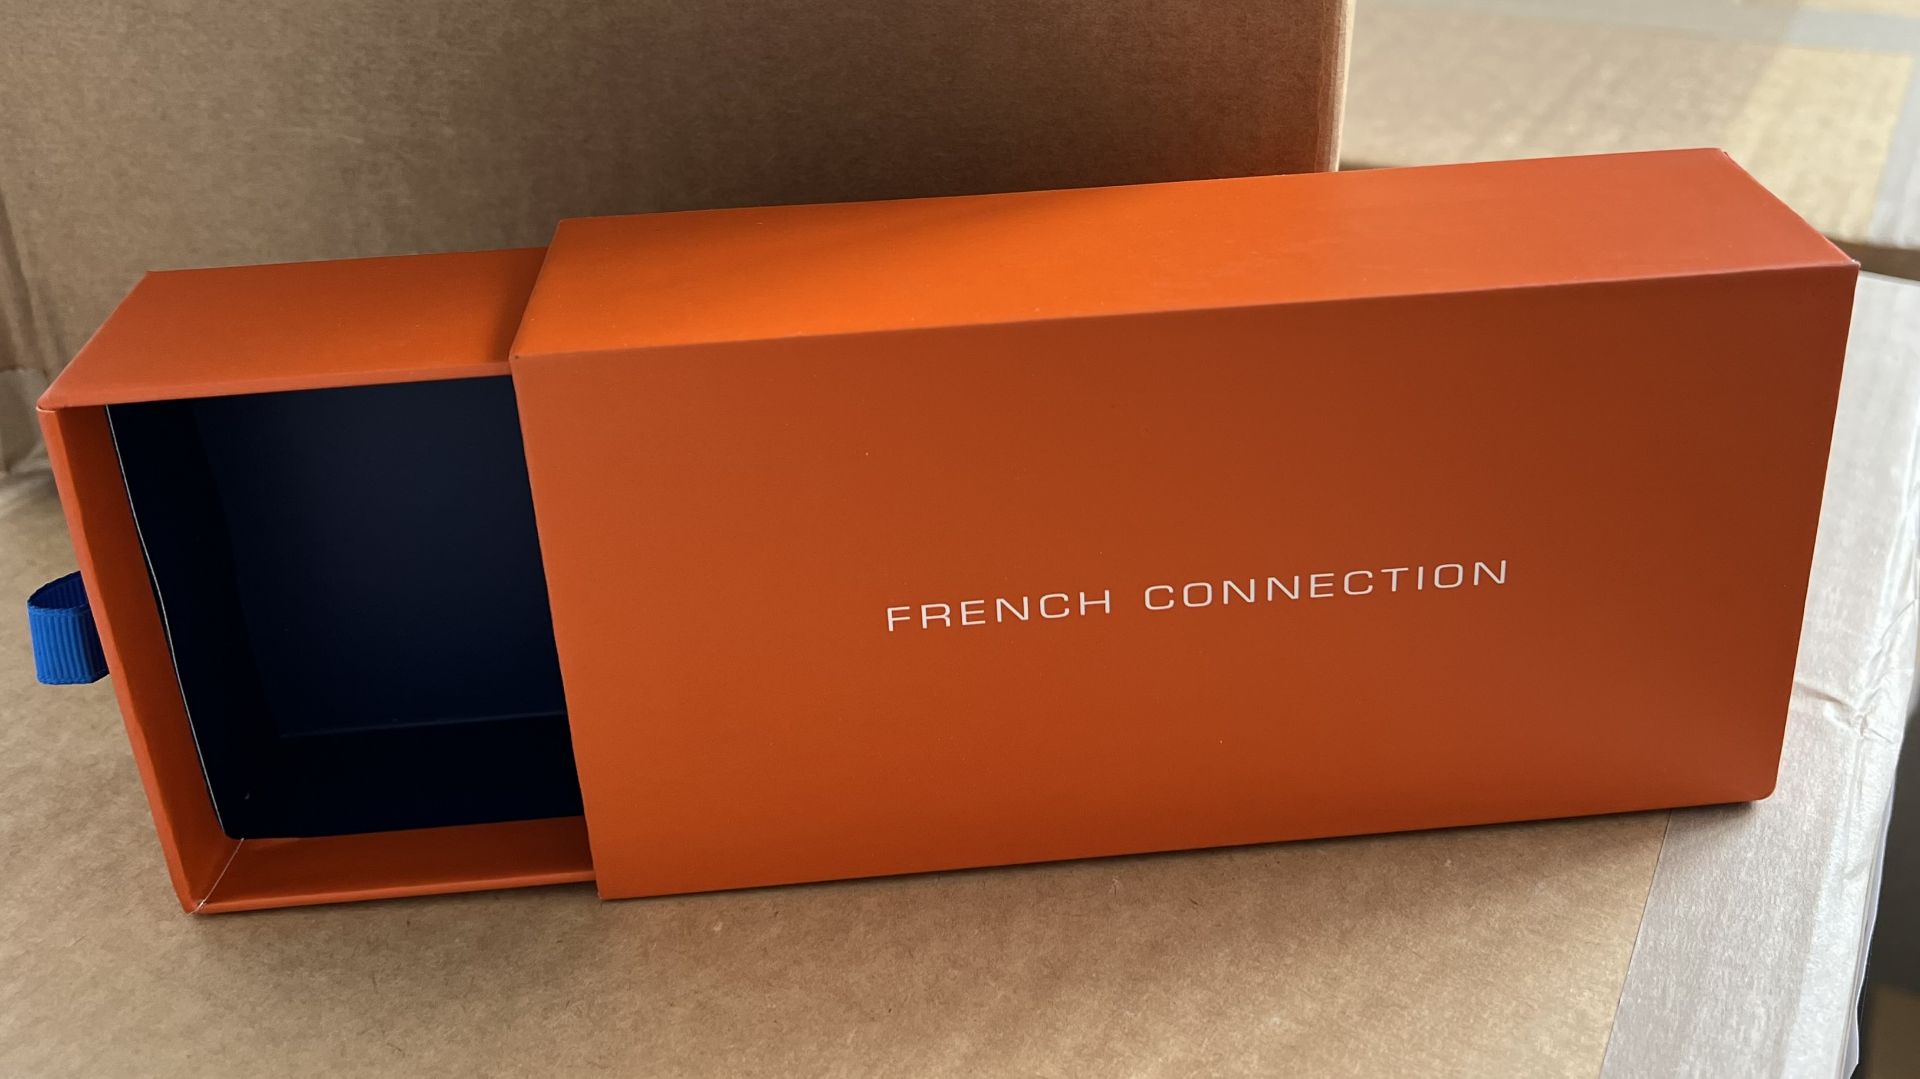 88 x French Connection Glasses / Sunglasses Orange Boxes - (NEW) - SELL FOR Â£440+ ! - Image 2 of 2